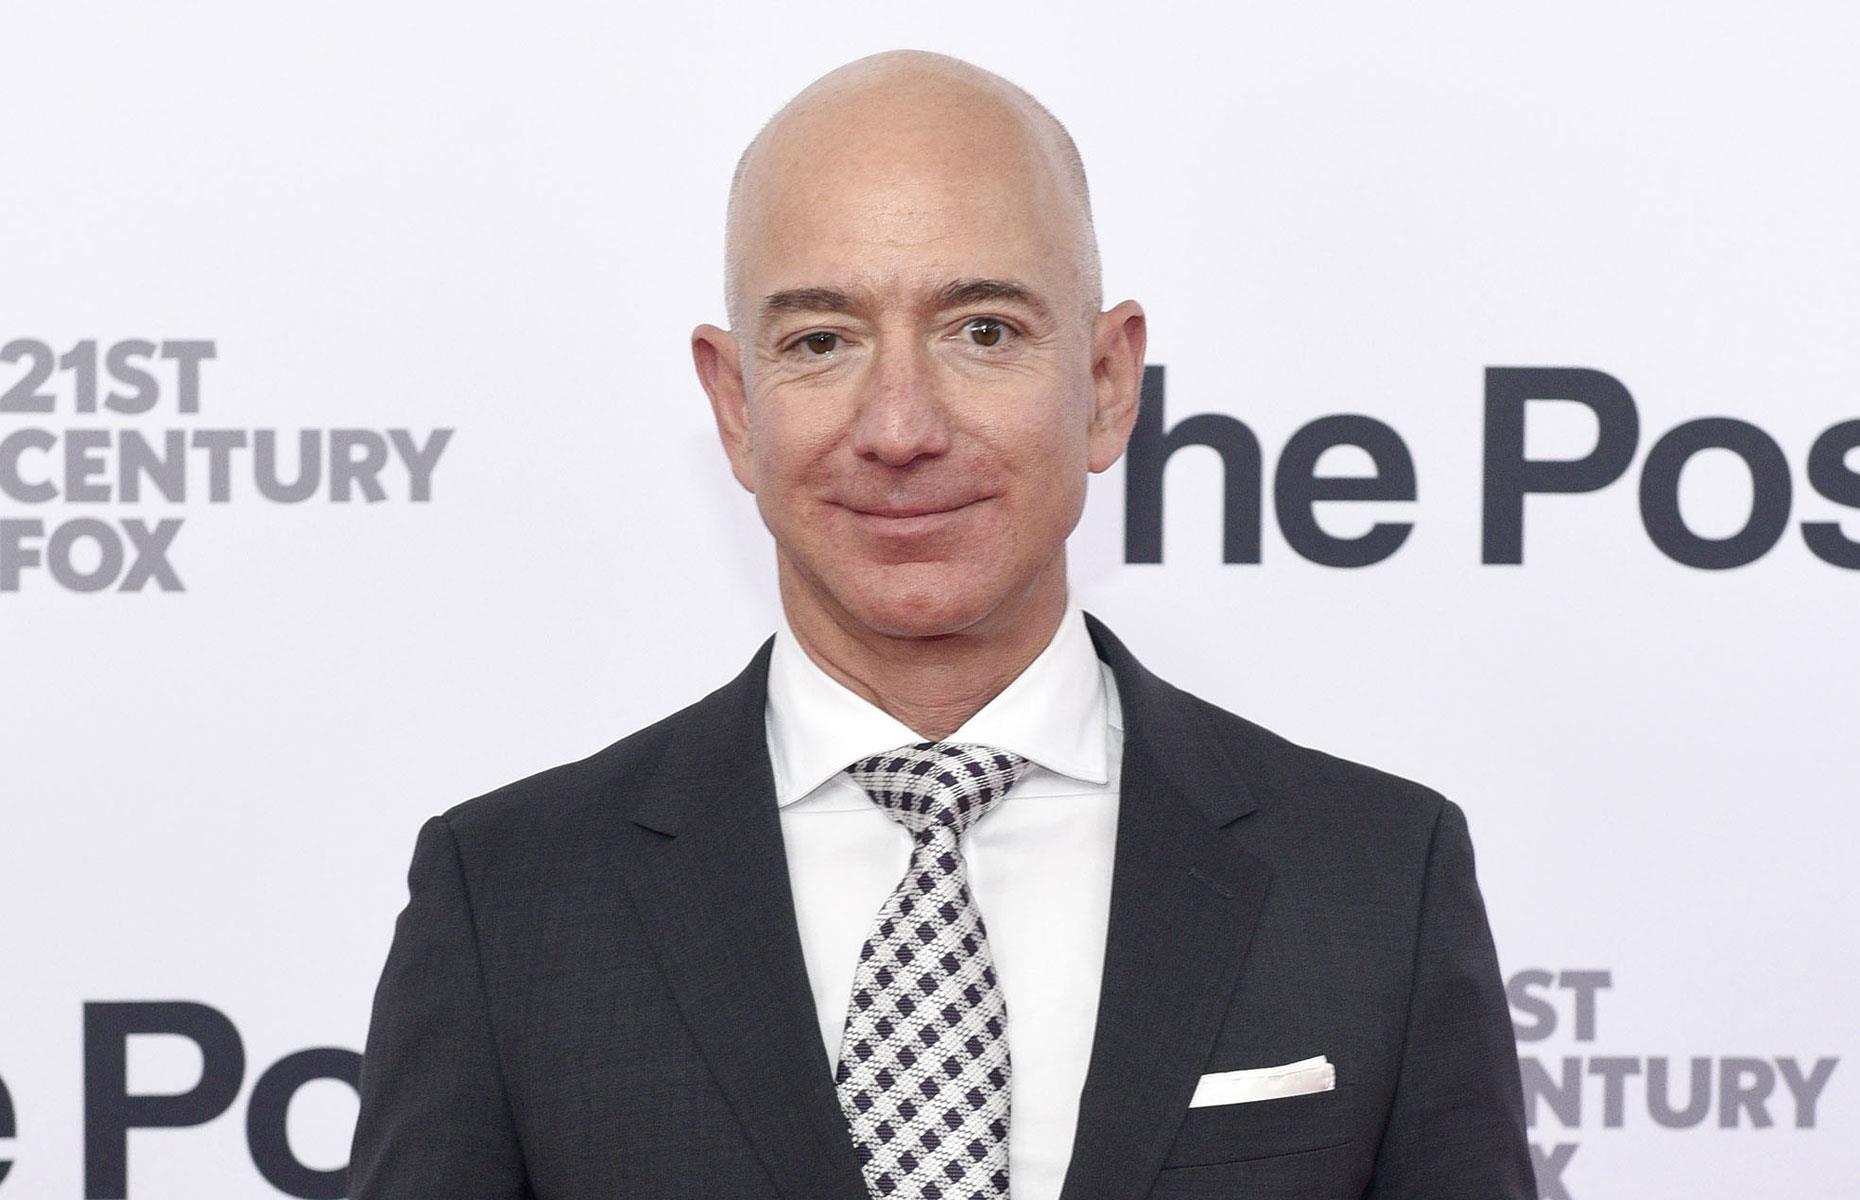 Fact: Jeff Bezos got significantly richer